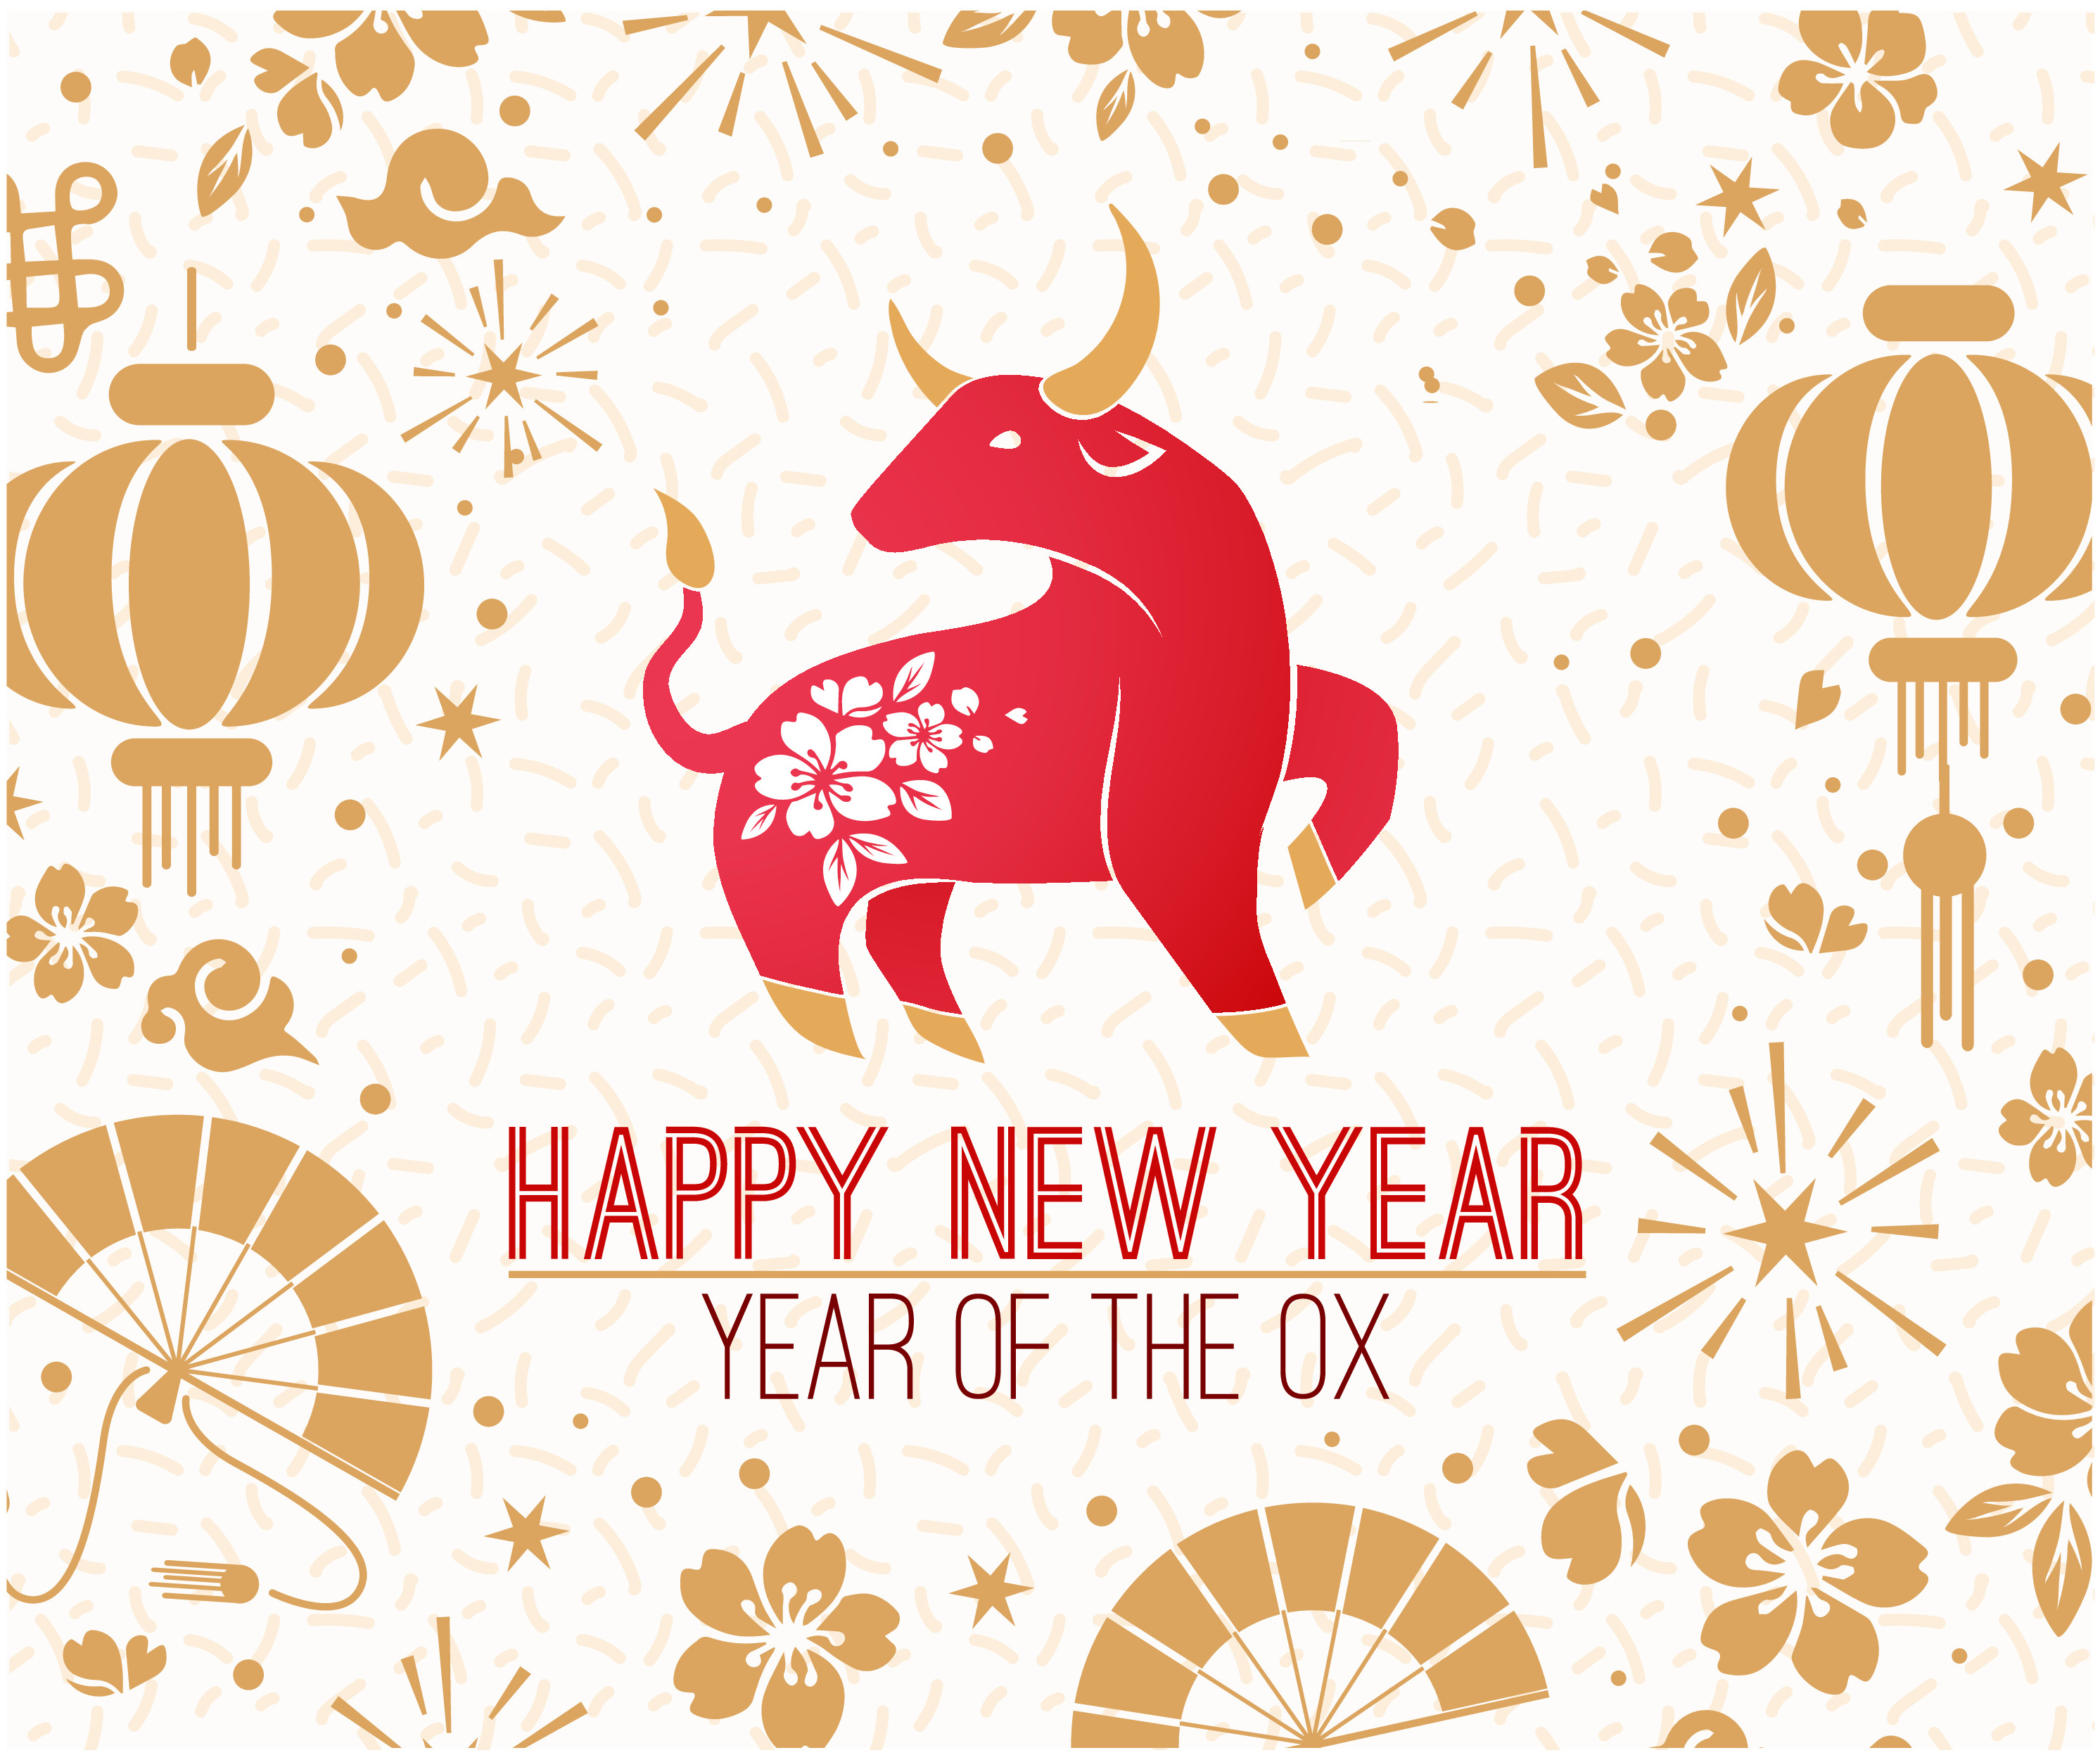 Year Of The Ox What Does This Chinese Zodiac Sign Mean?